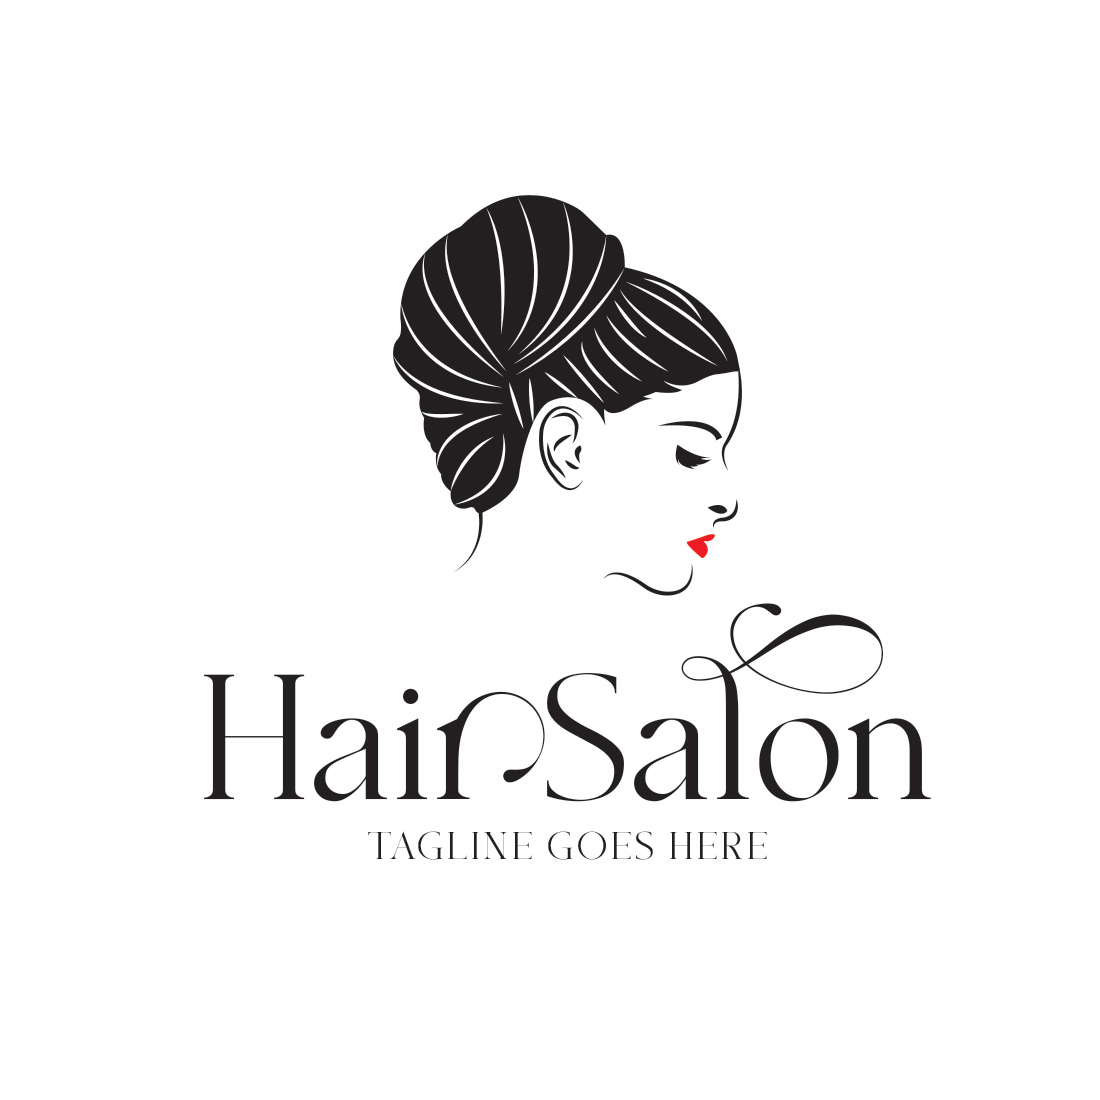 Beauty salon logo Images - Search Images on Everypixel